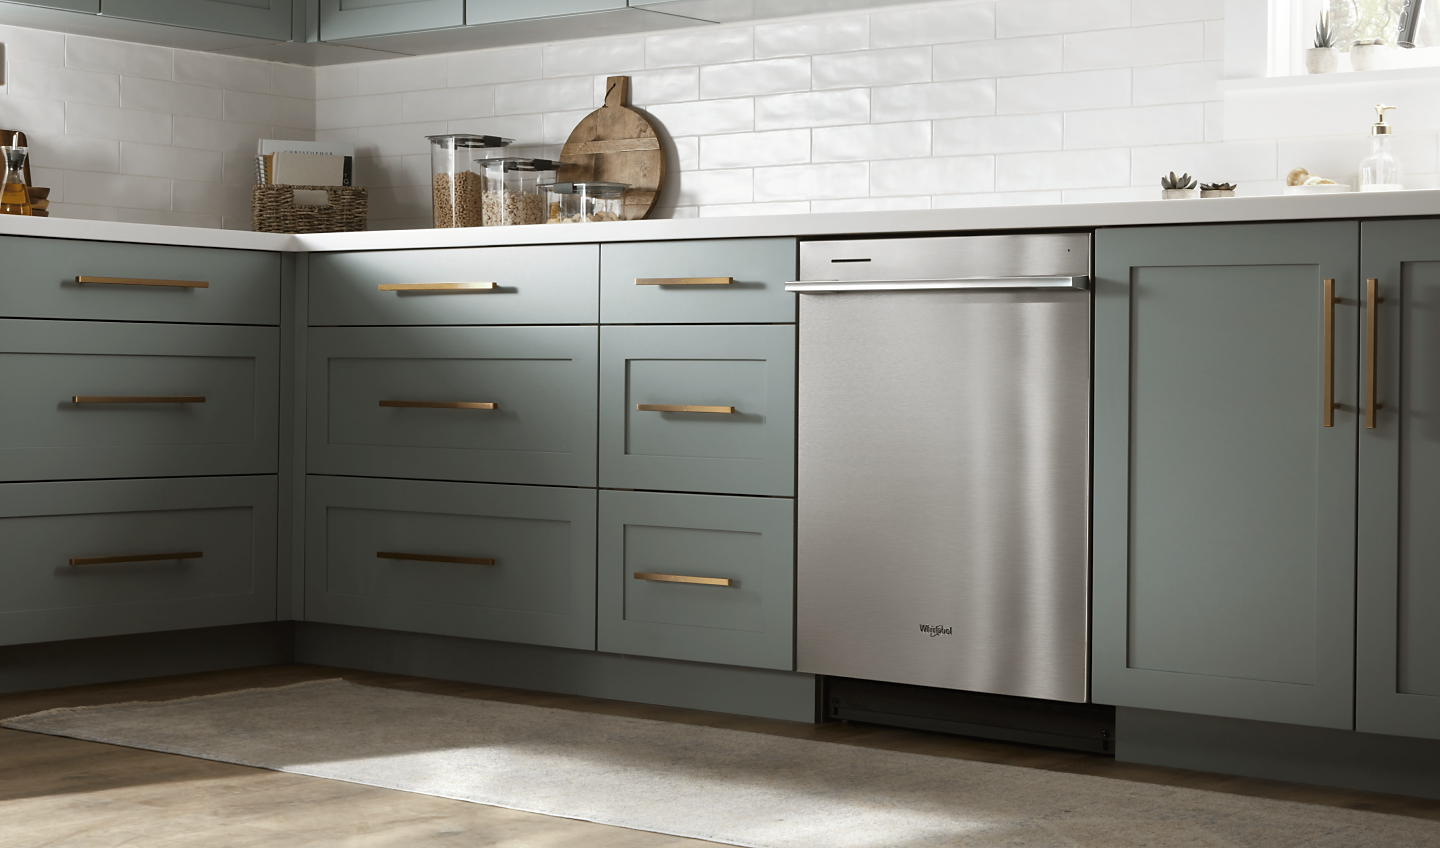 A Whirlpool® Dishwasher set in a kitchen